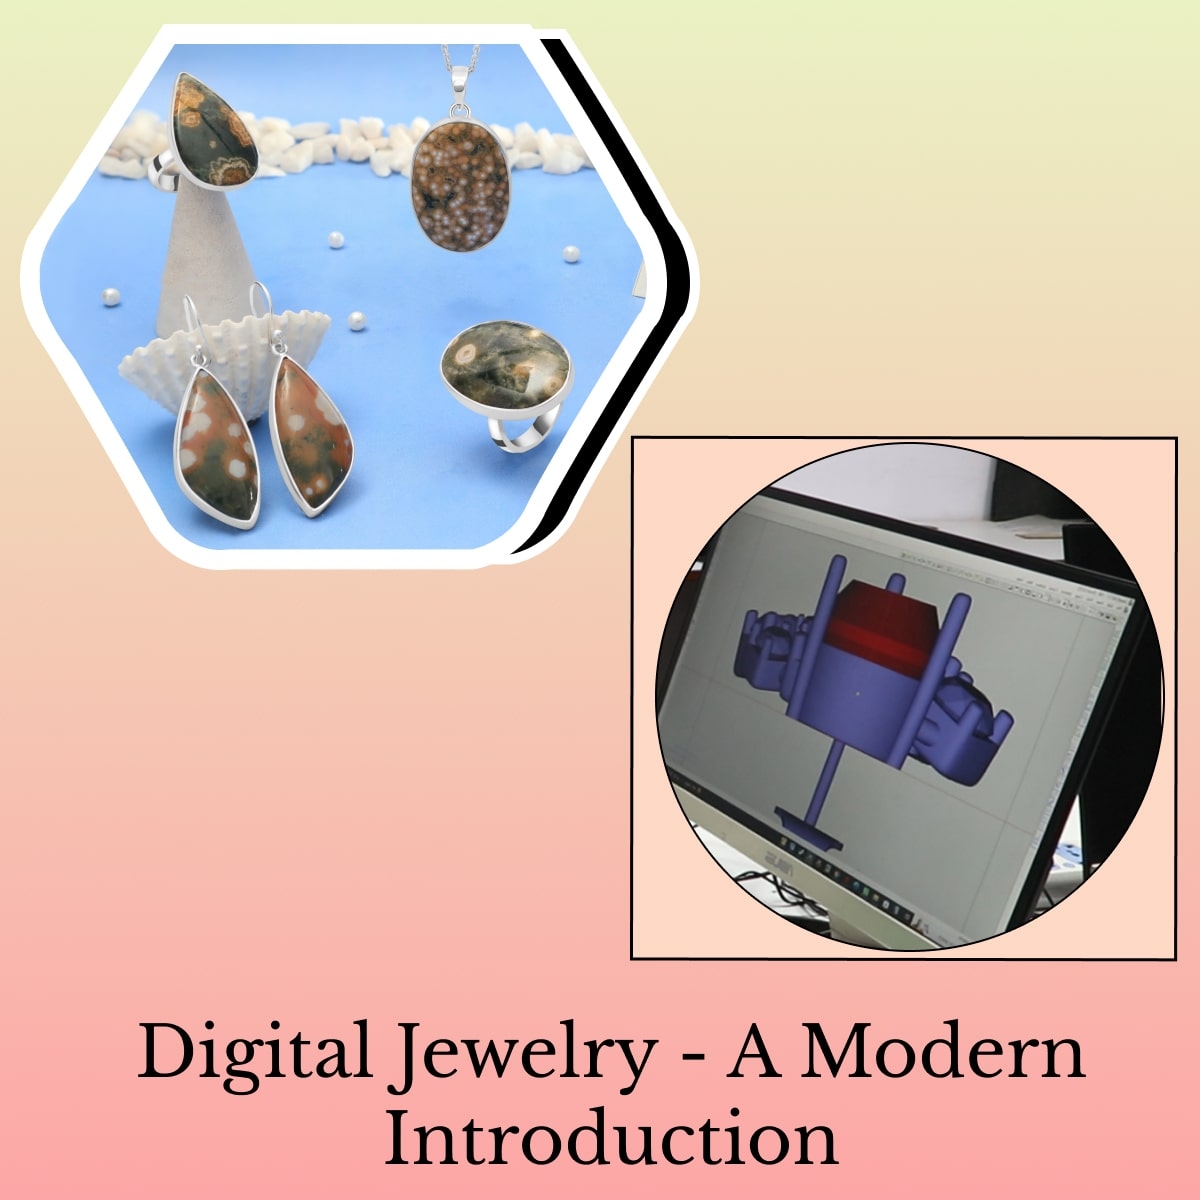 Introduction to Digital Jewelry